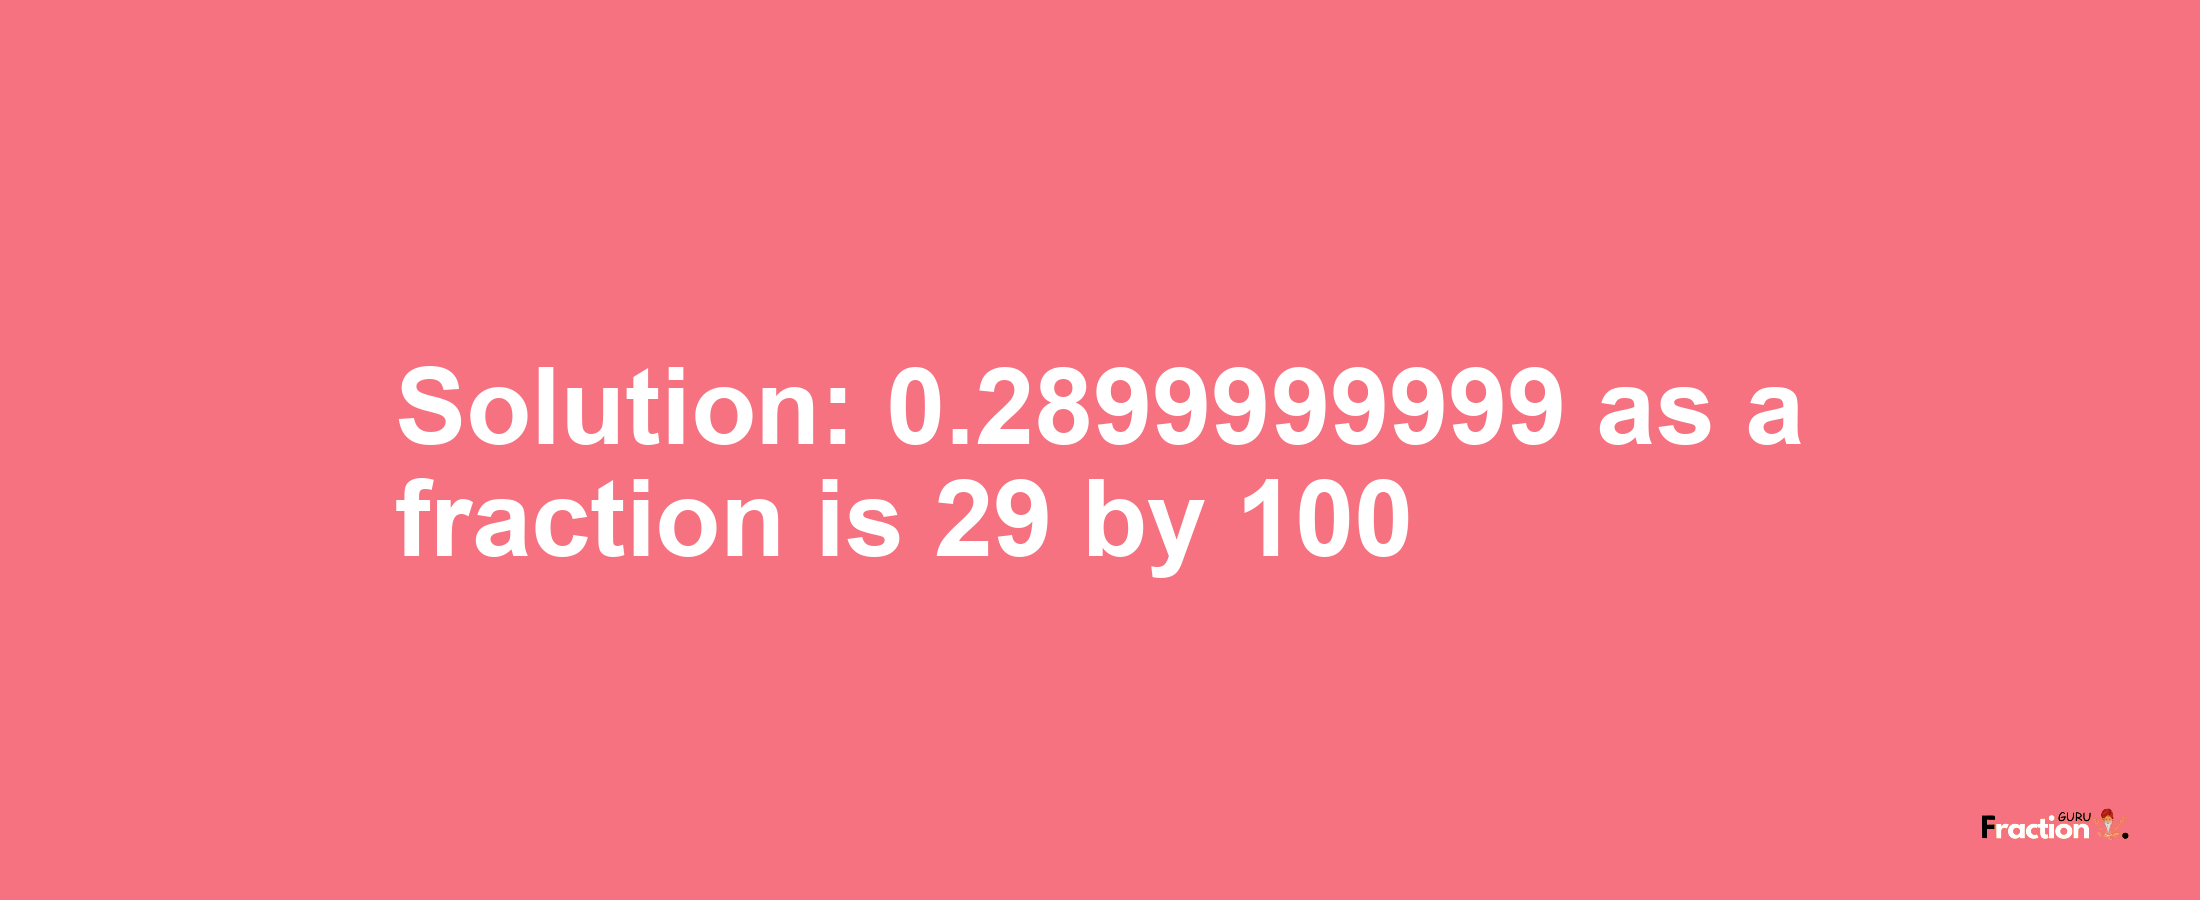 Solution:0.2899999999 as a fraction is 29/100